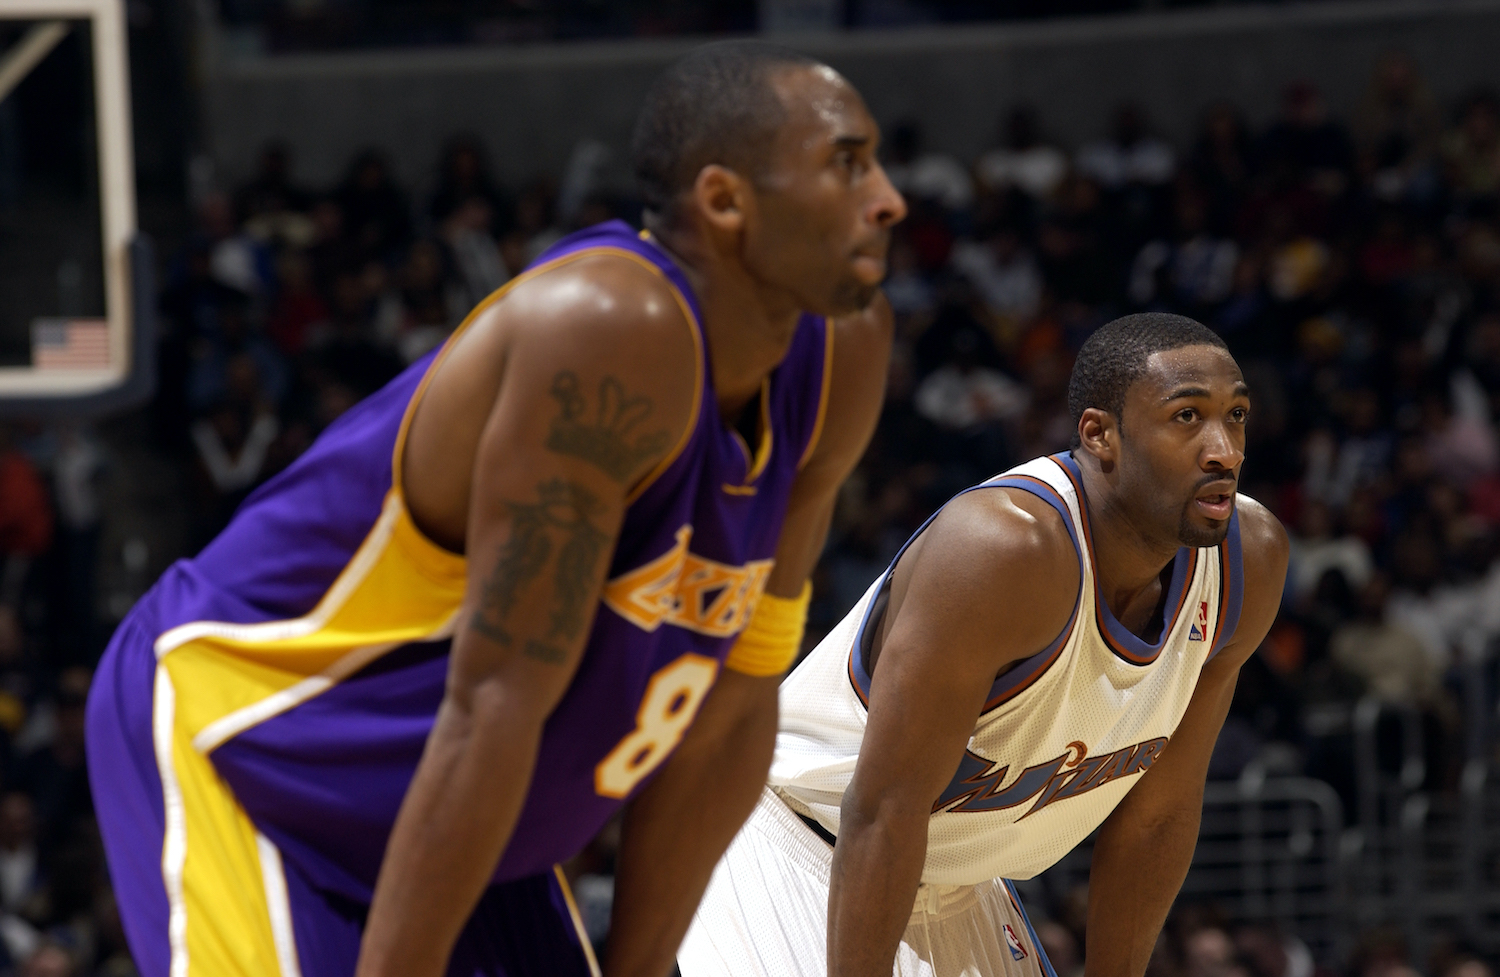 Kobe Bryant (L) and Gilbert Arenas (R) stand on the court during a 2005 NBA contest.